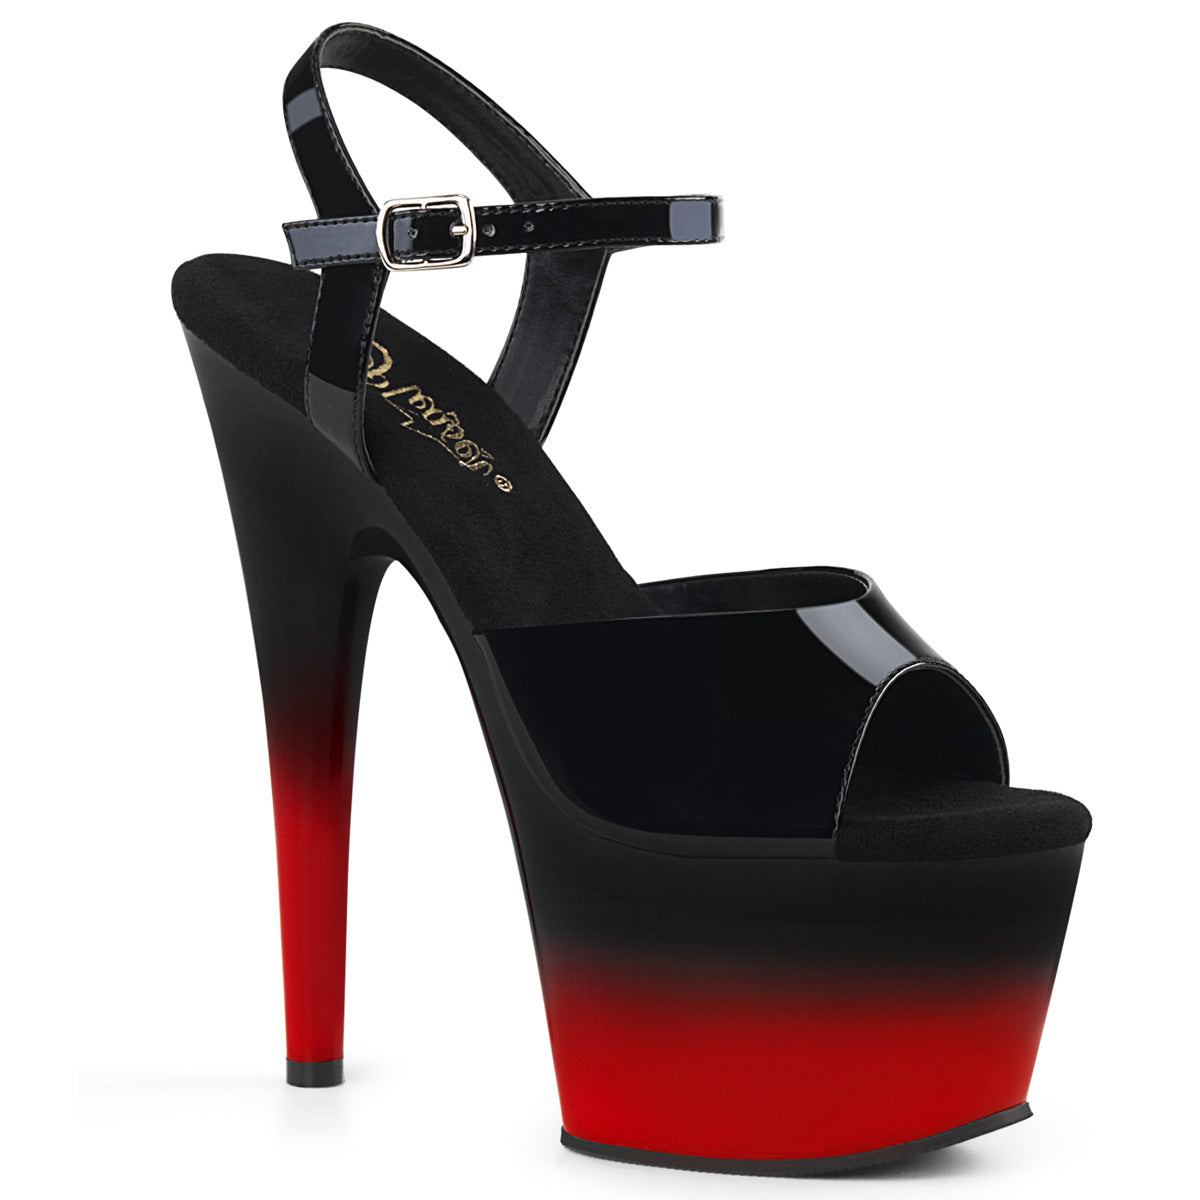 ADORE-709BR-H / B / BR 7 "PLEASER FAST DELIVERY 24-48h 